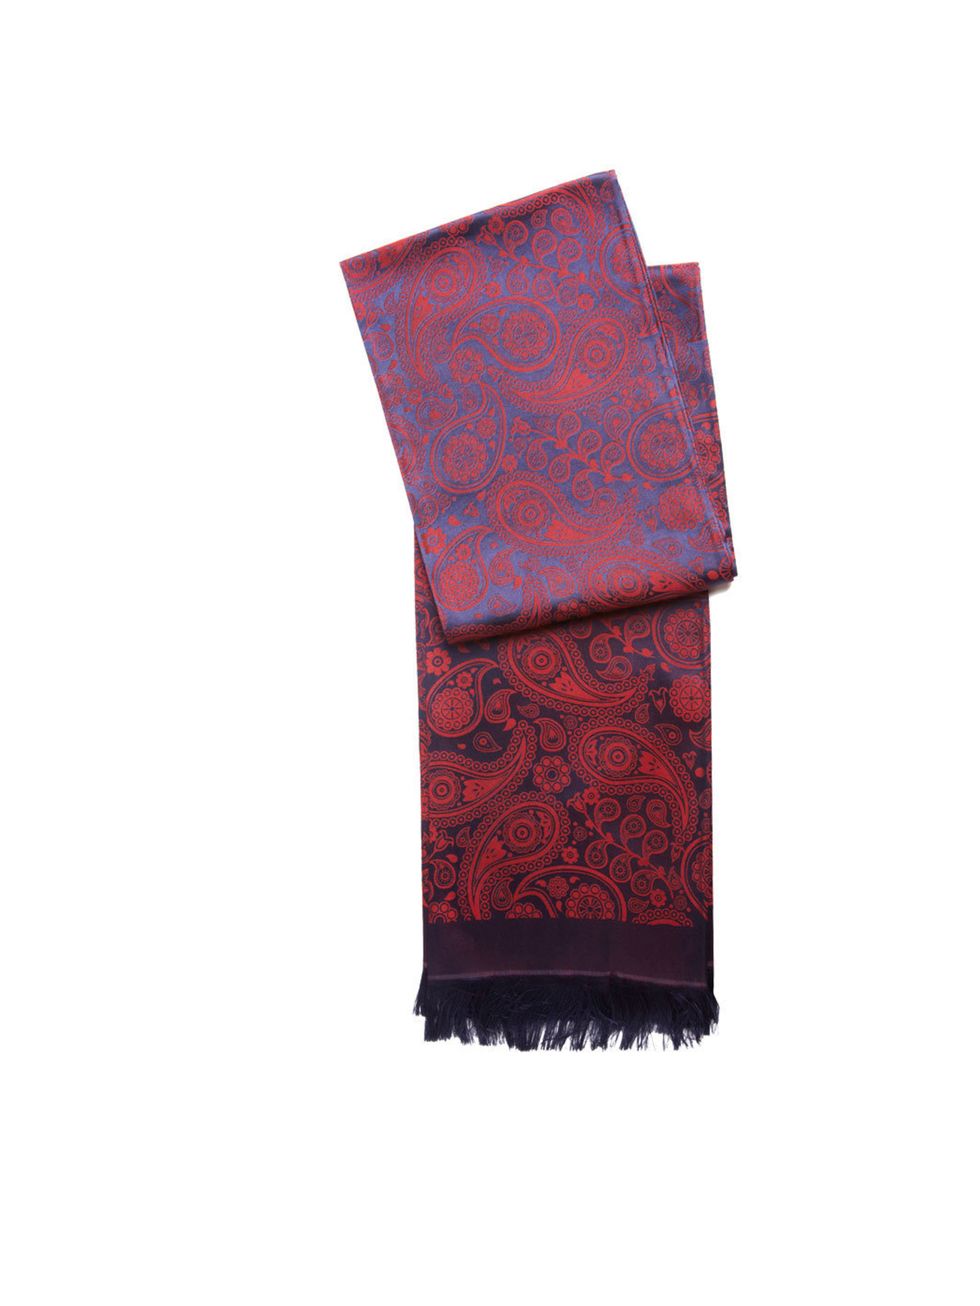 <p><strong><6 MONTHS</strong></p><p><strong> </strong>Simon Carter signature Paisley Silk Scarf £70 from <a href="http://www.simoncarter.net">www.simoncarter.net</a></p>